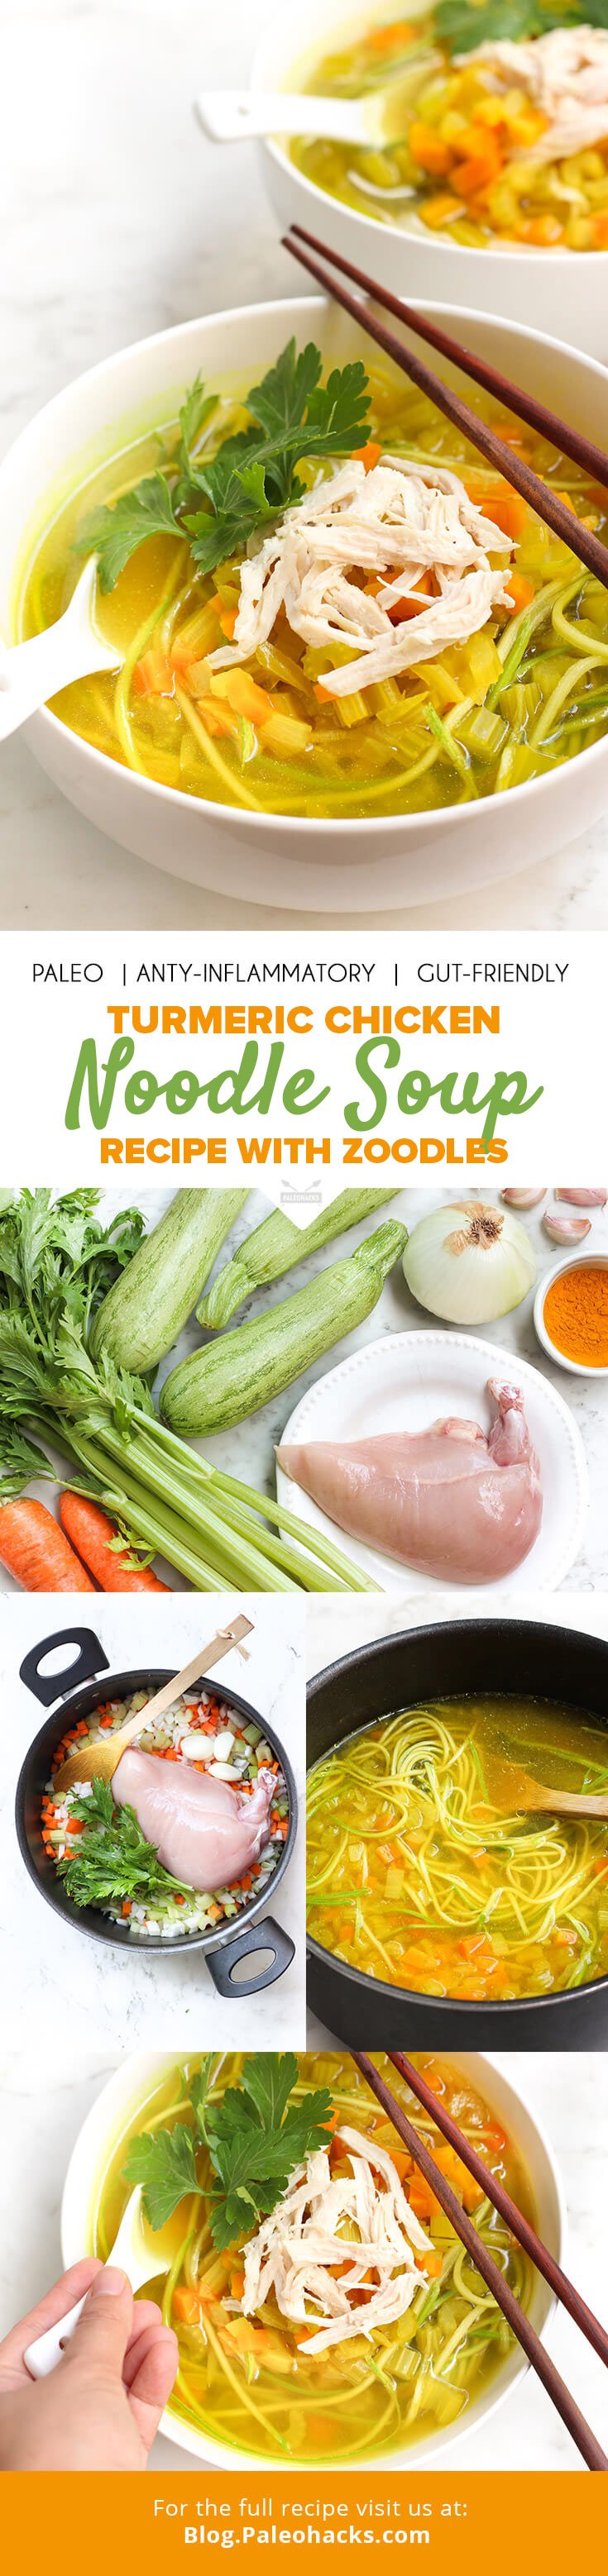 This Turmeric Chicken Soup with Zucchini Noodles is the perfect remedy for a chilly night. Filled with fresh veggies, lean protein and anti-inflammatory turmeric, it’s the perfect meal to cozy up to!